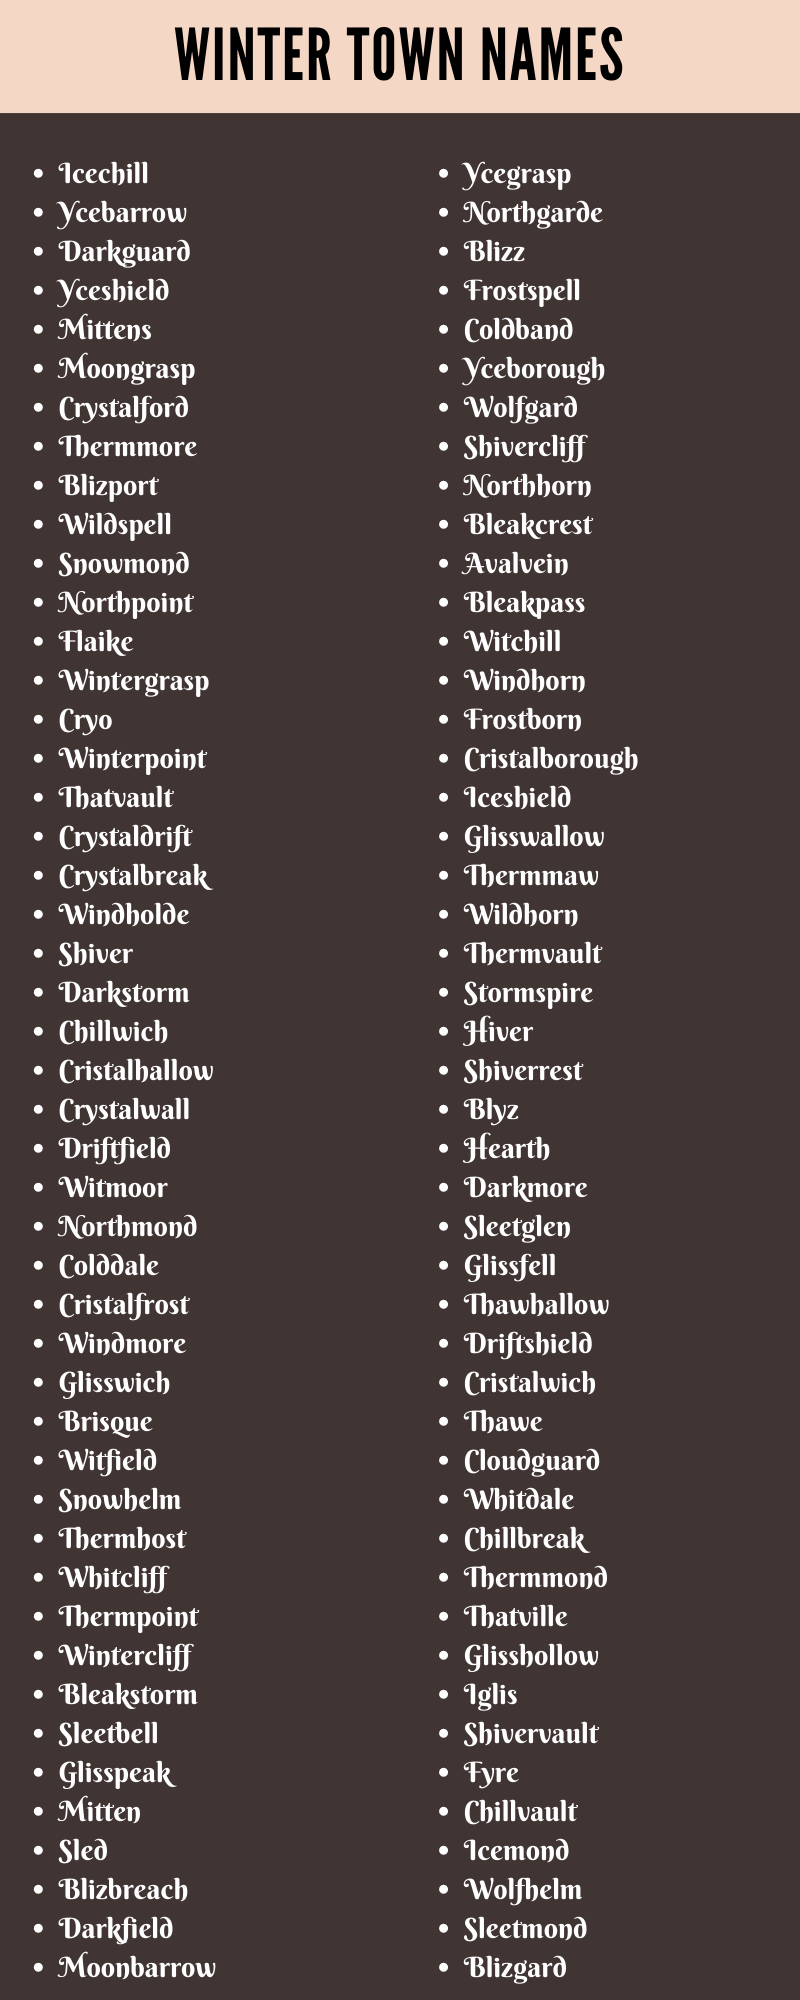 Winter Town Names